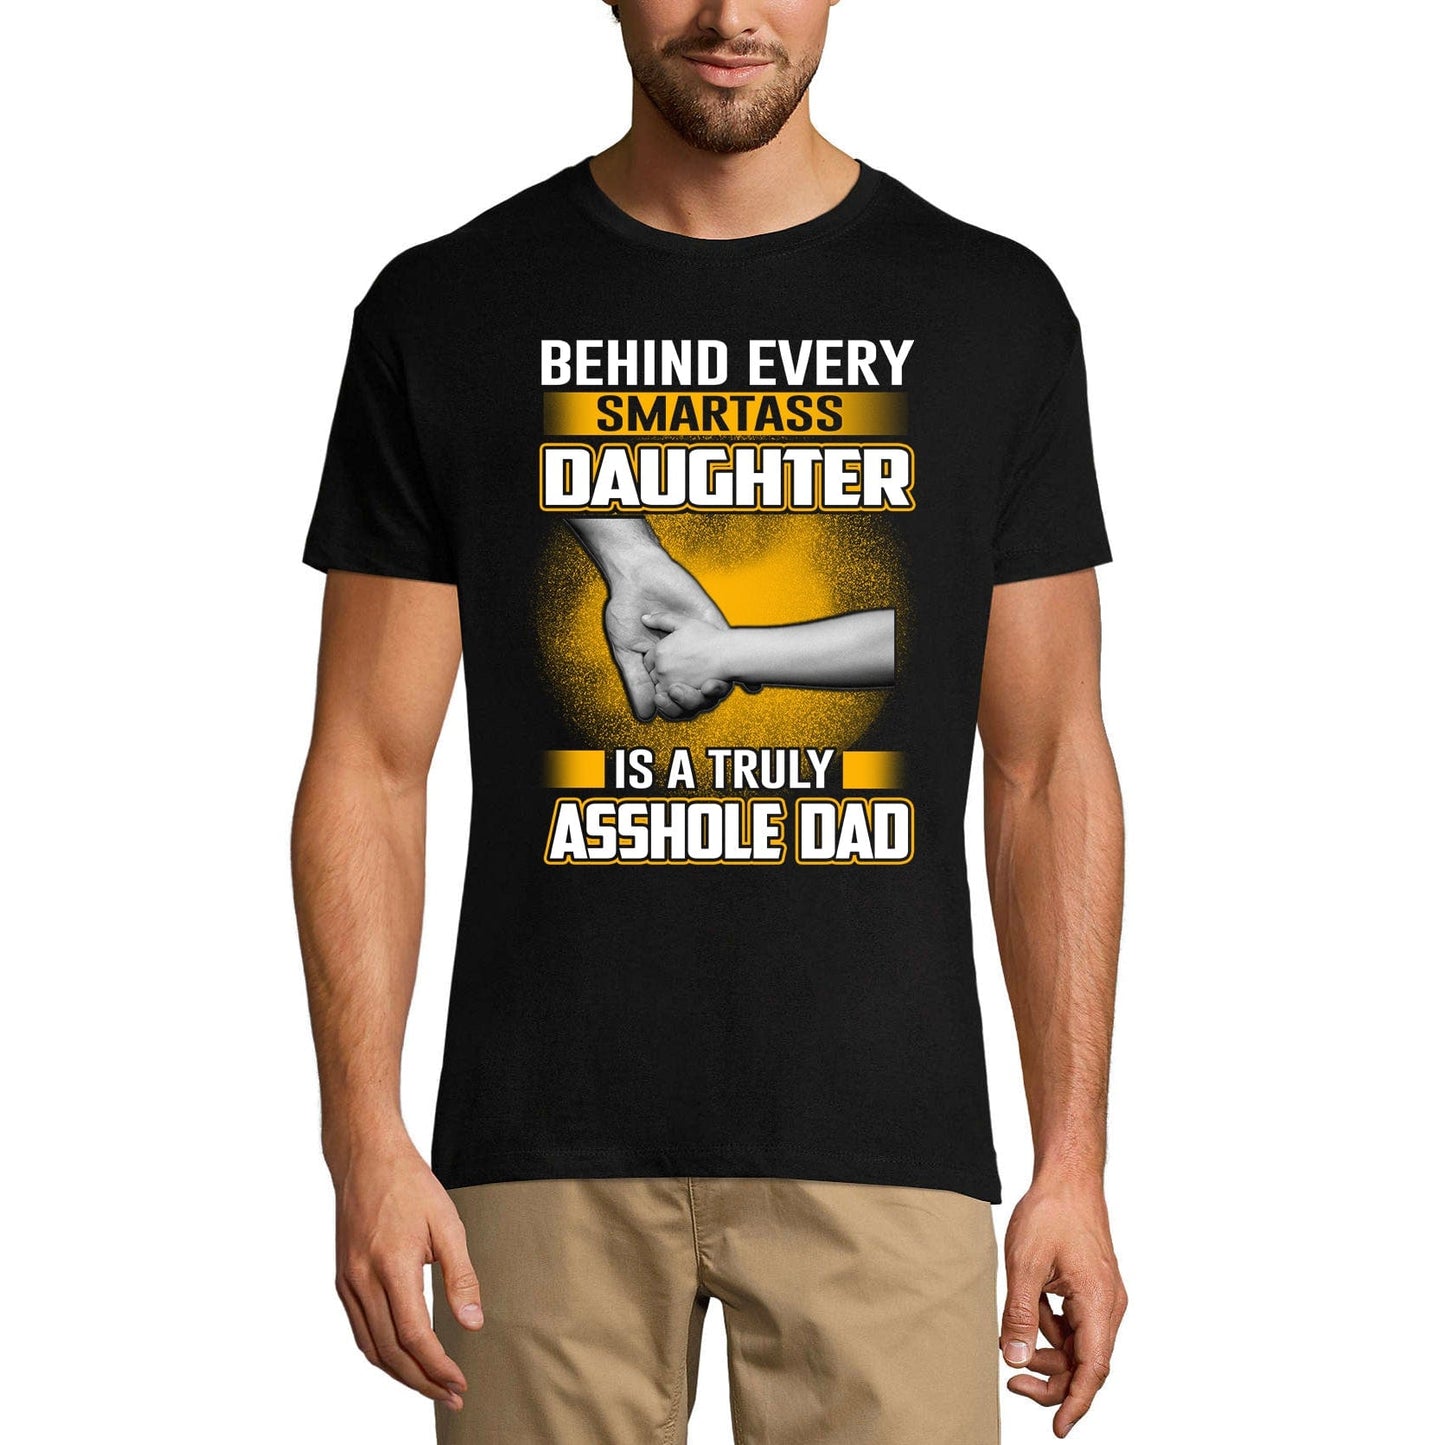 ULTRABASIC Men's T-Shirt Behind Every Smartass Daughter is a Truly Asshole Dad